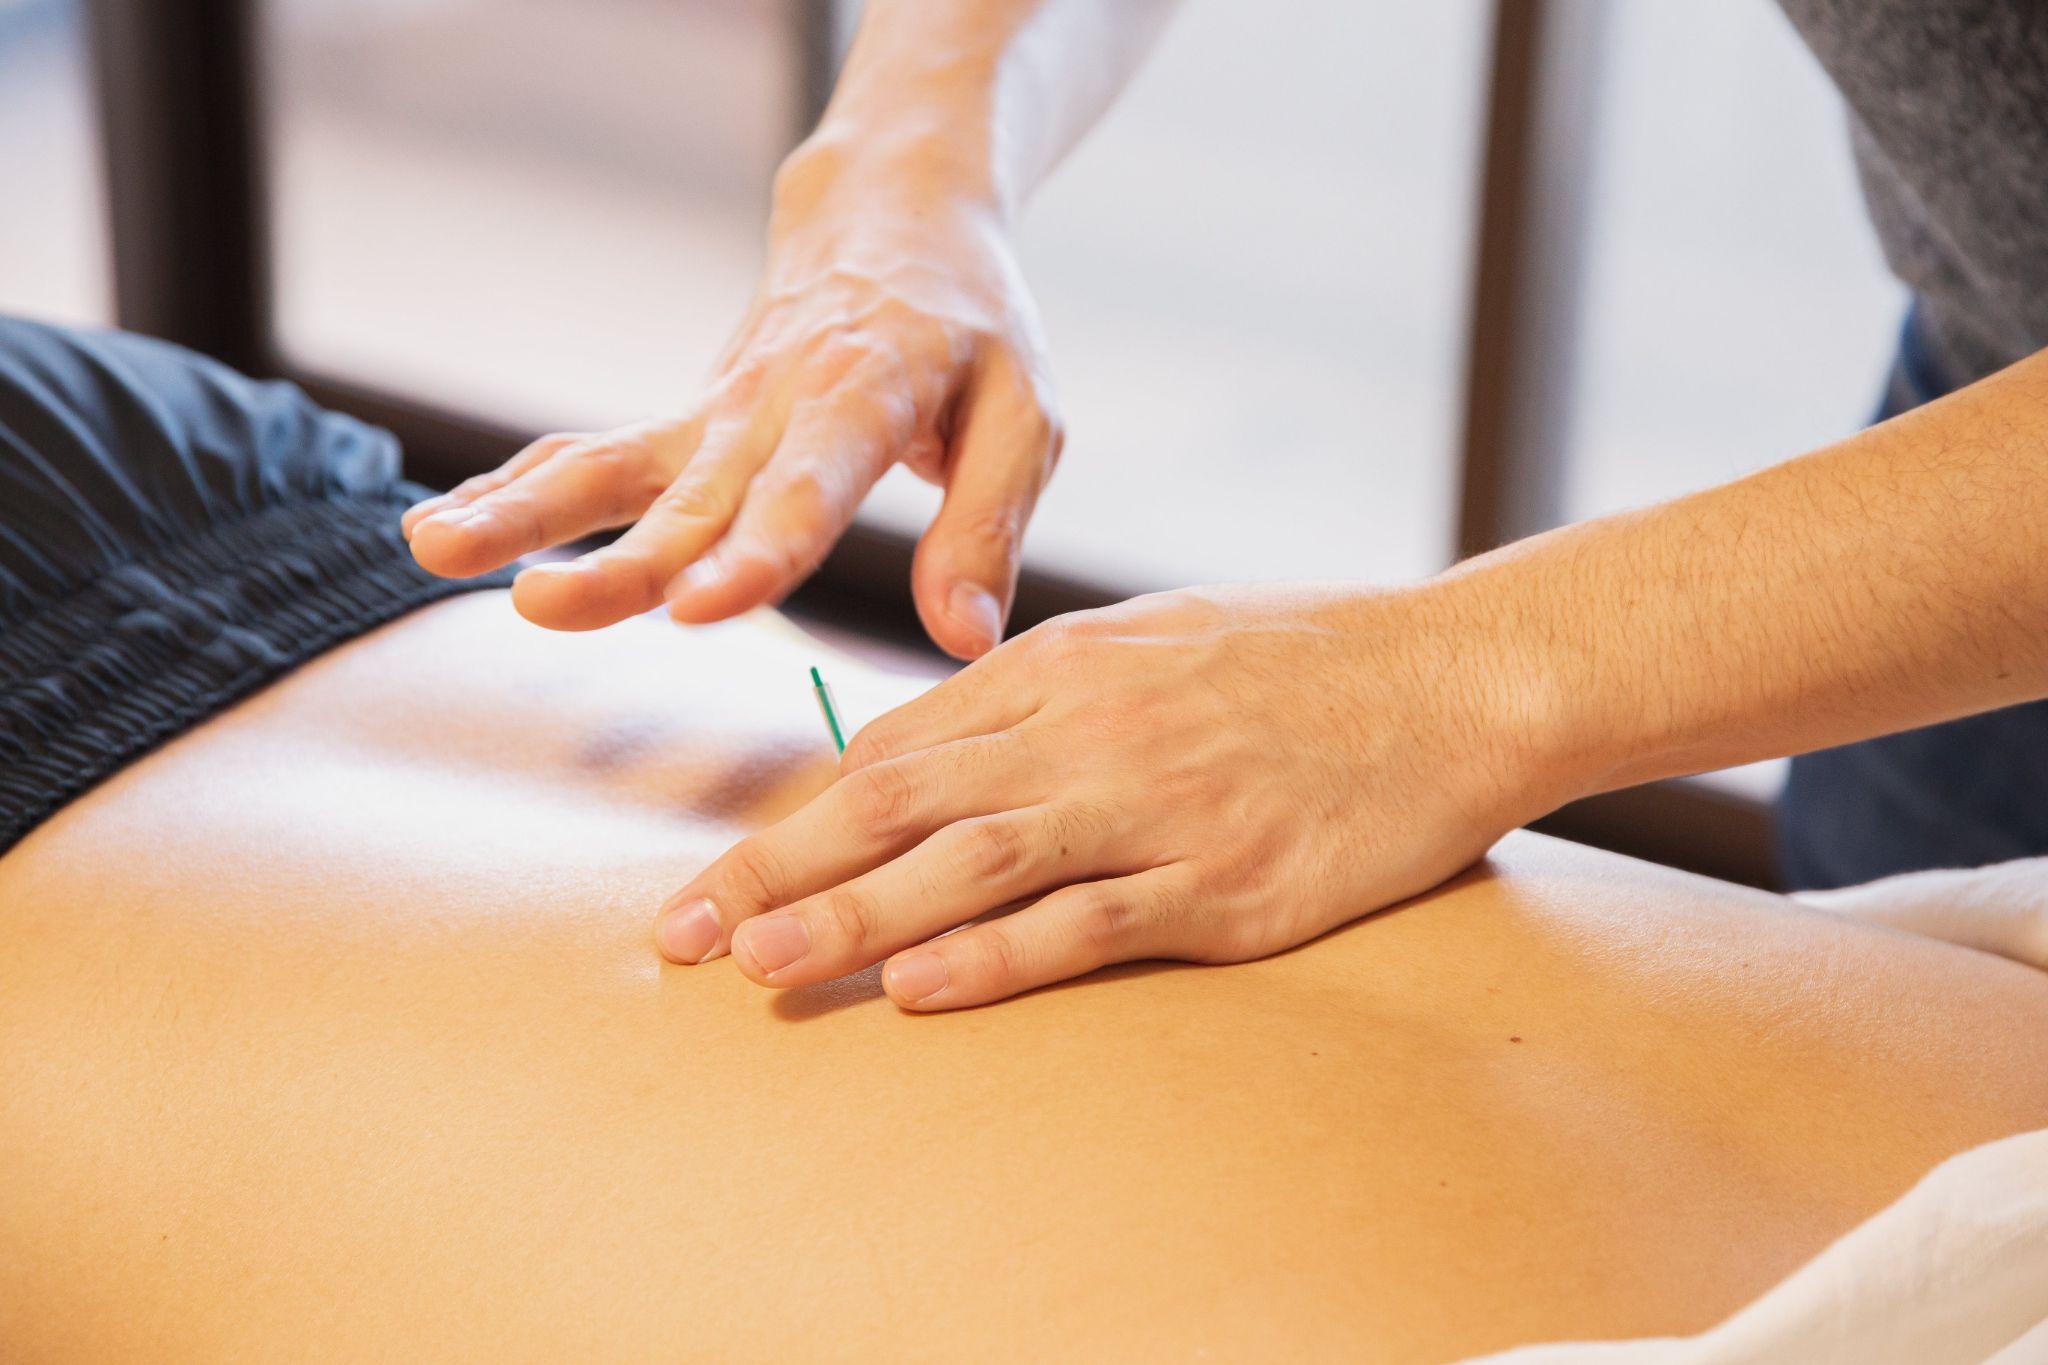 Acupuncture Treatment: Exploring The Traditional Chinese Medicine